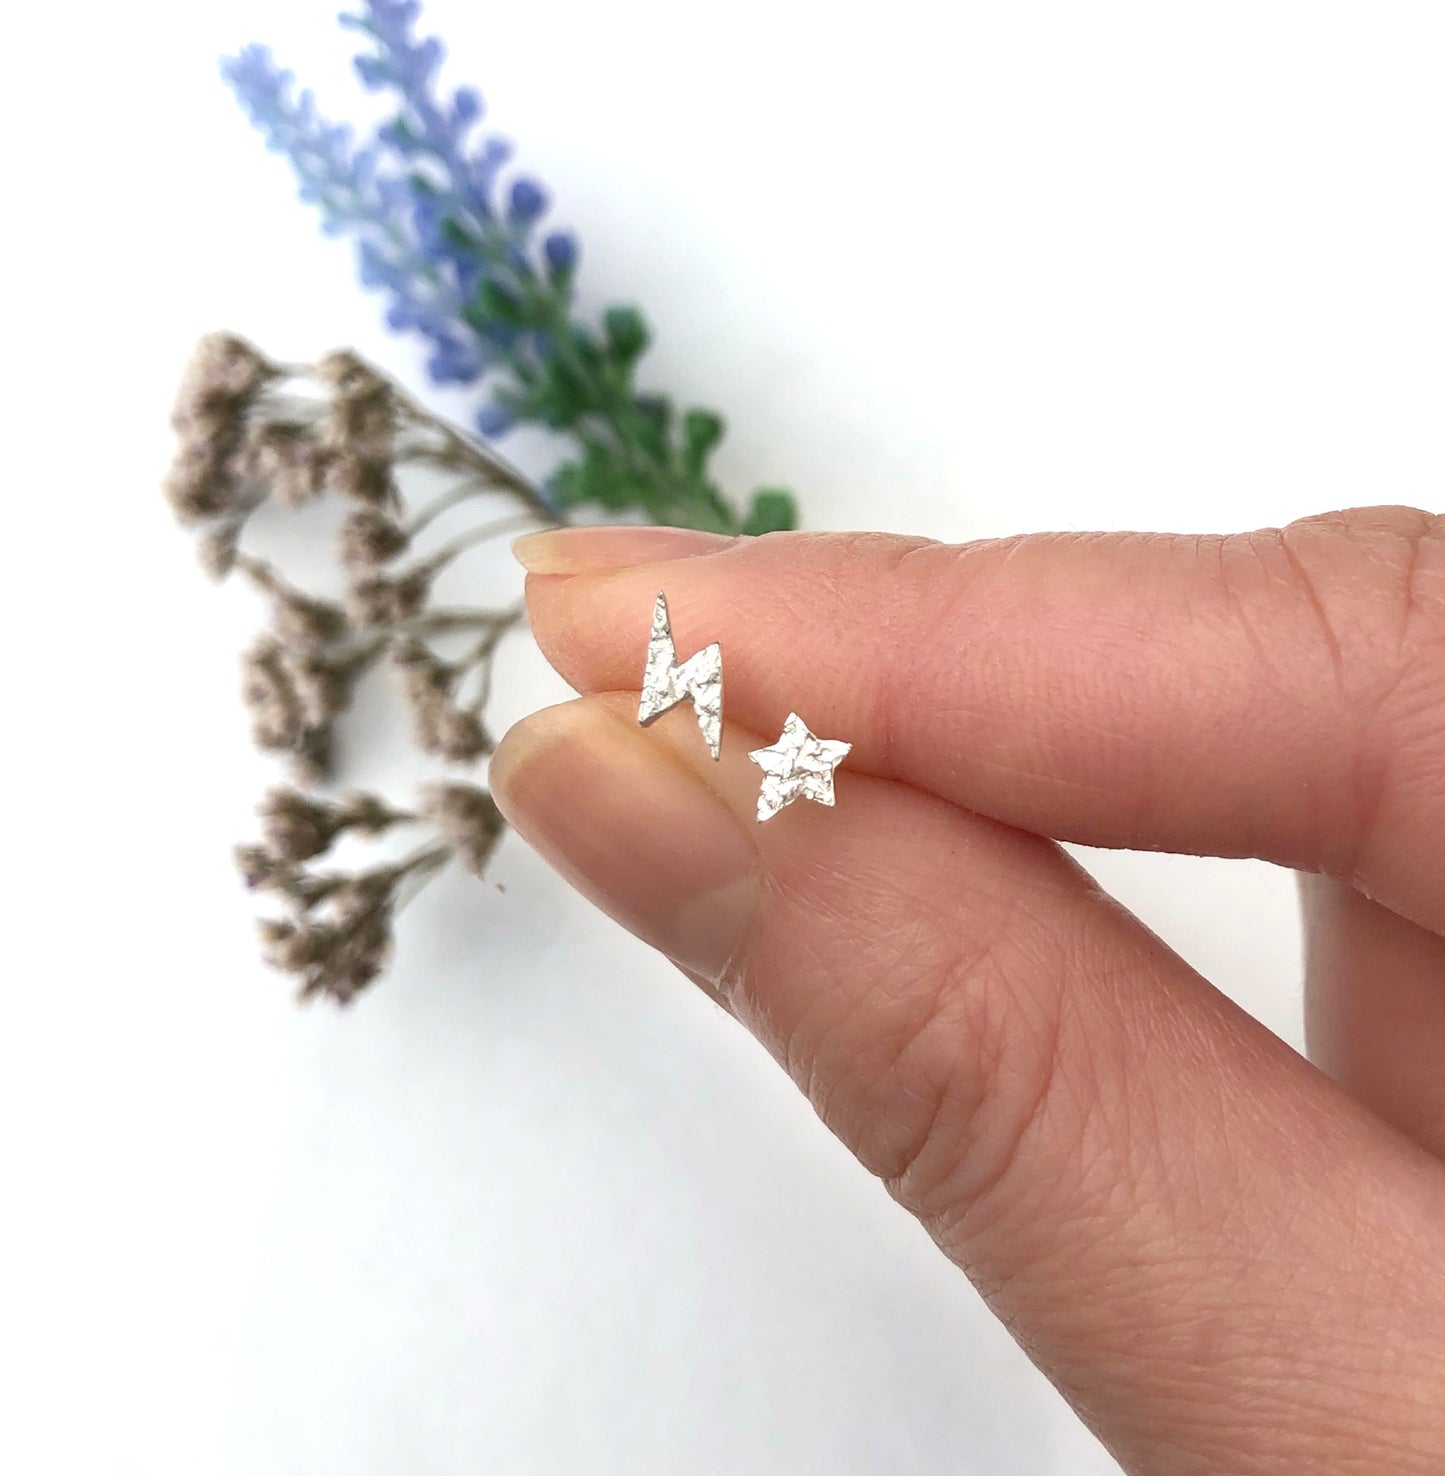 Lightning Bolt And Star Earrings, Sterling Silver Mismatched Earrings